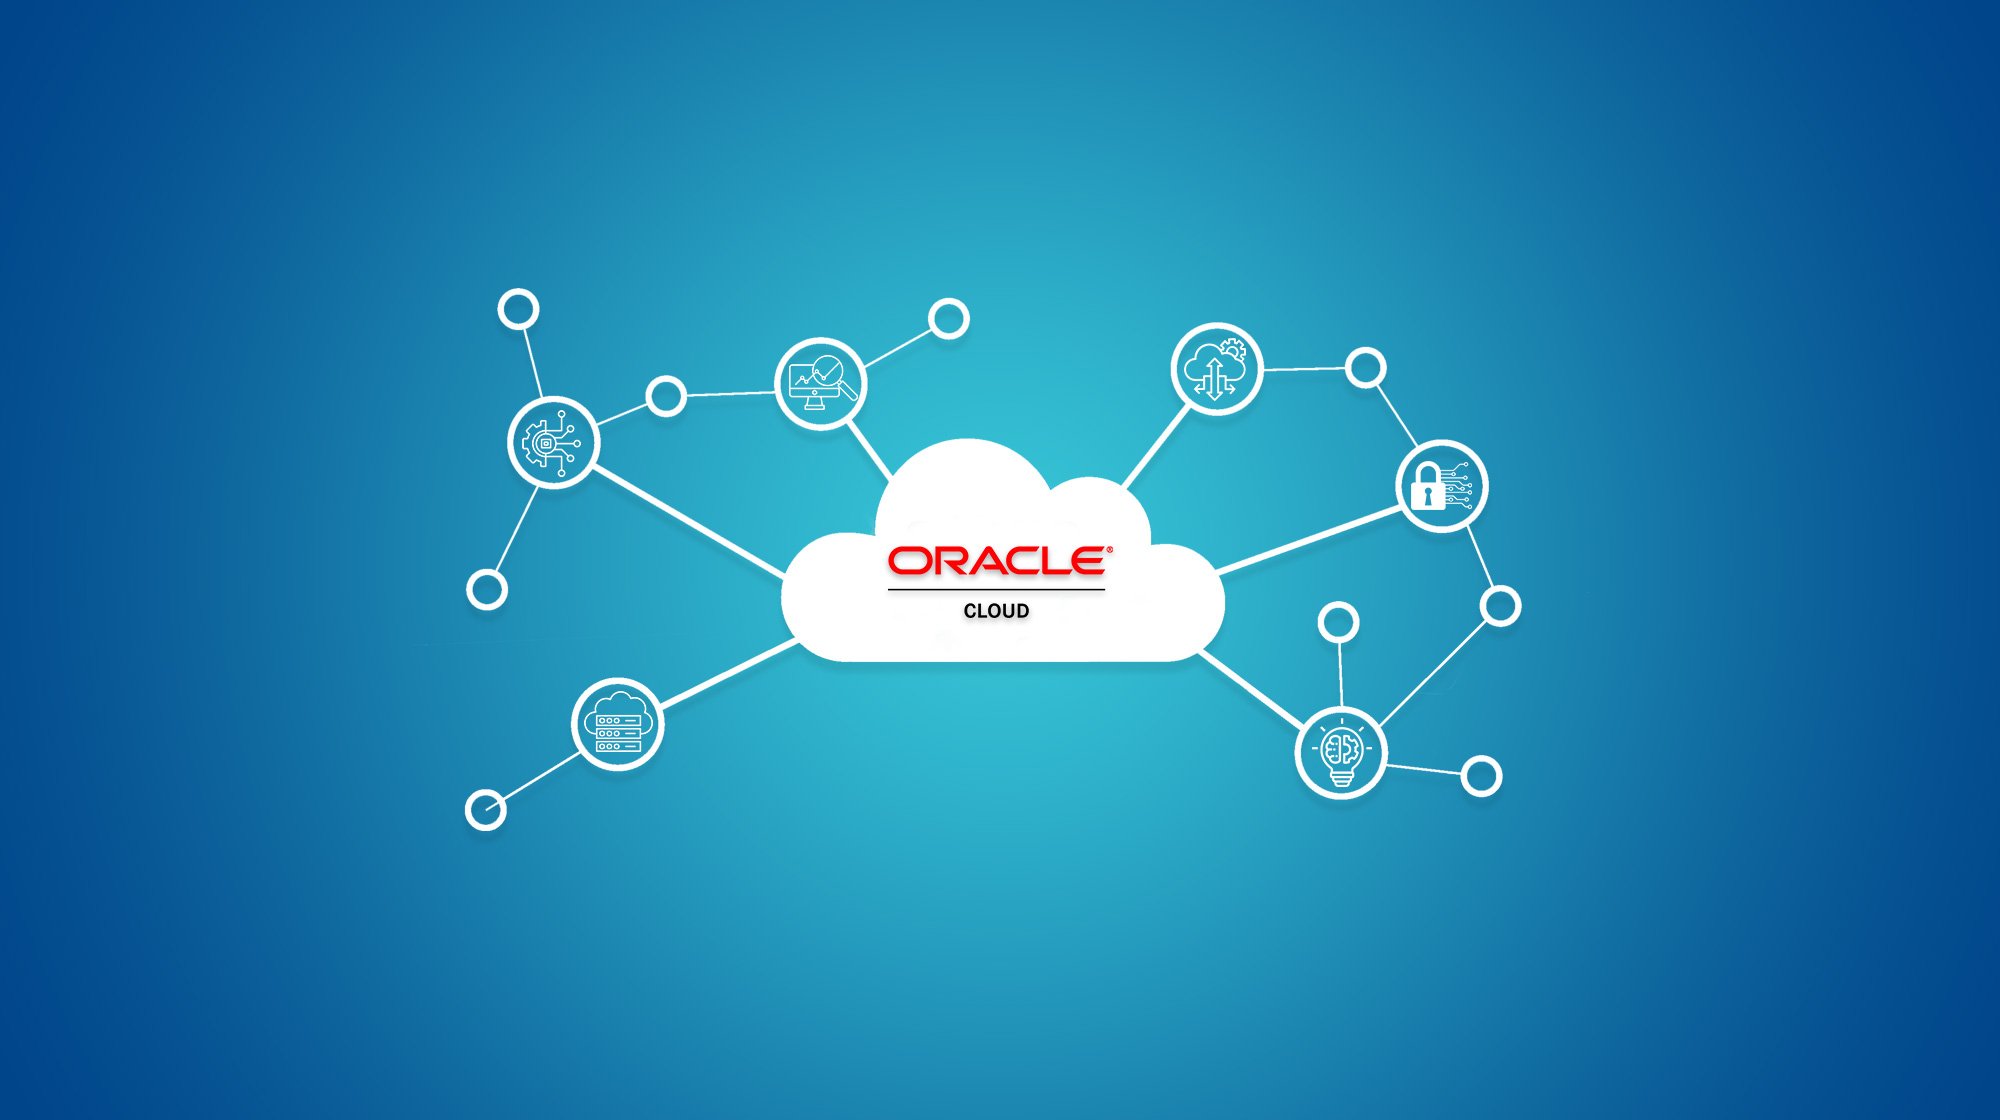 Mastering-oracle-cloud-5-essential-skills-for-success